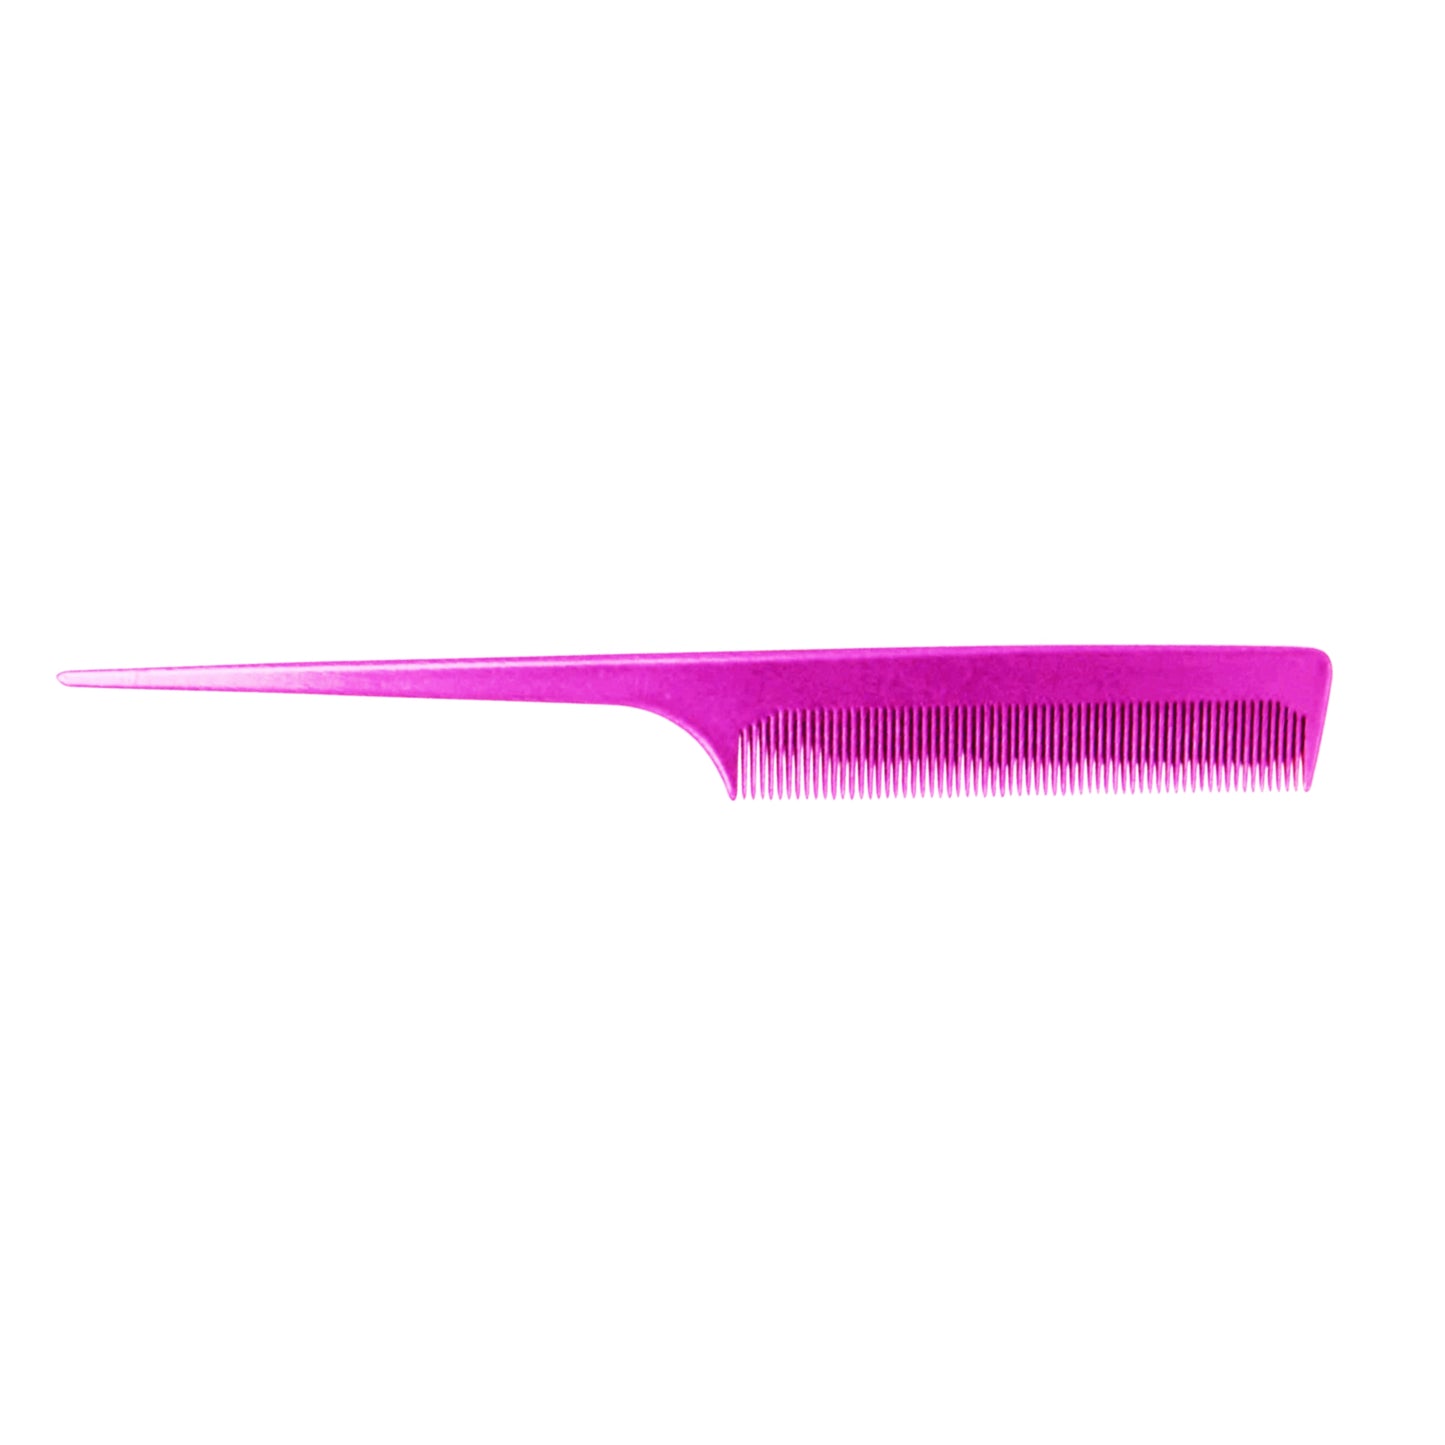 Pegasus MICOLOR 101, 8in Hard Rubber Fine Tooth Rat Tail Comb, Handmade, Seamless, Smooth Edges, Anti Static, Heat and Chemically Resistant, Great for Parting, Coloring Hair | Peines de goma dura - Pink